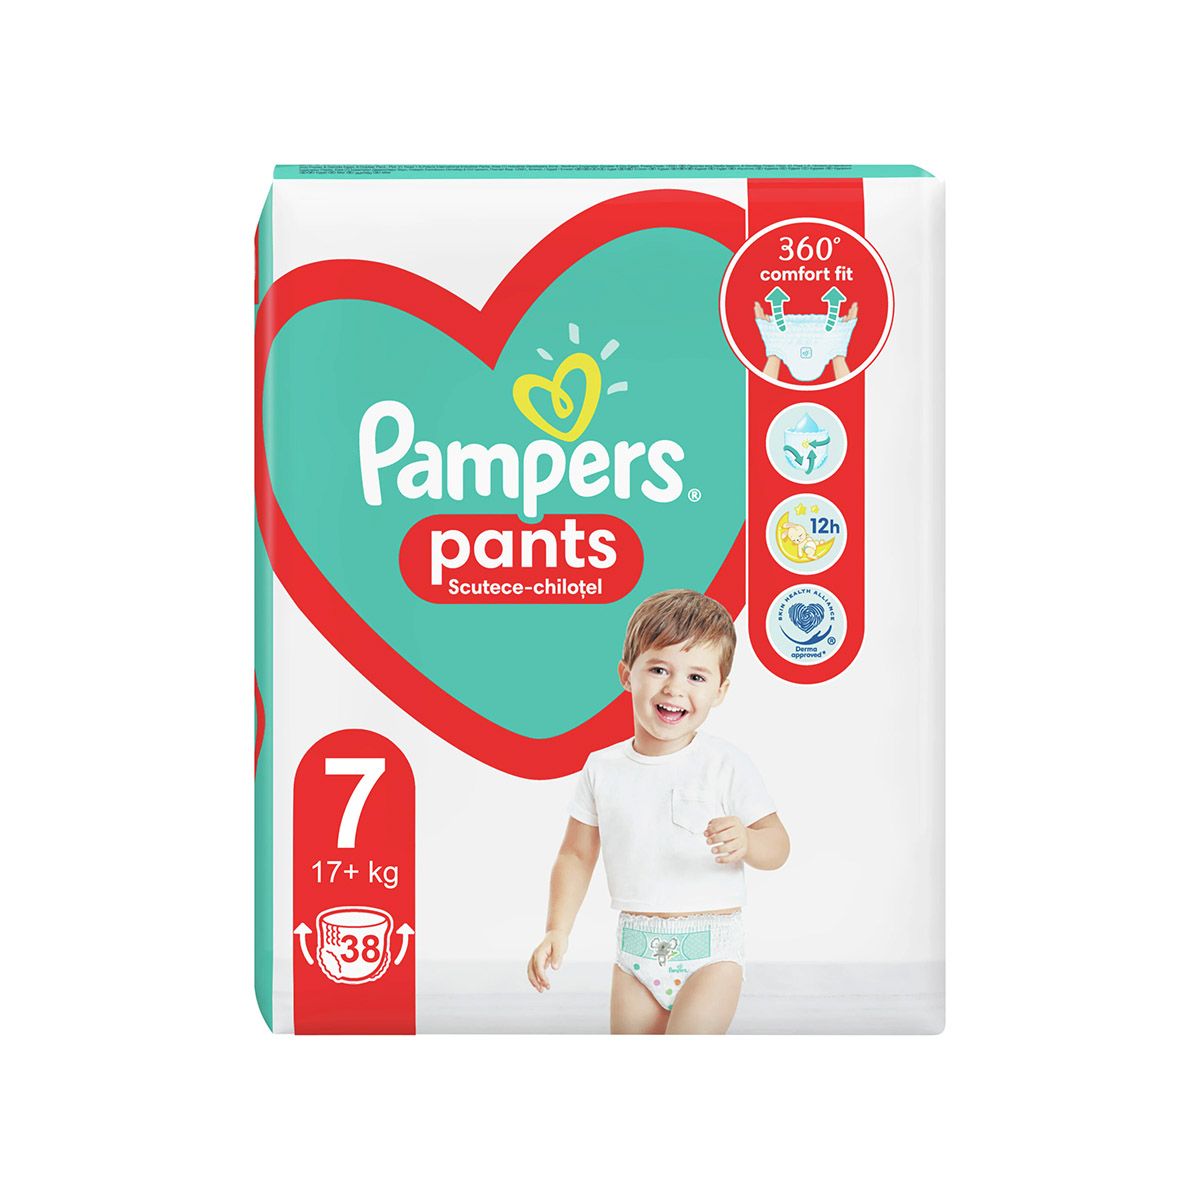 Scutece Pampers 7 Chilotel Act Baby, 17+ kg, 38 buc image0